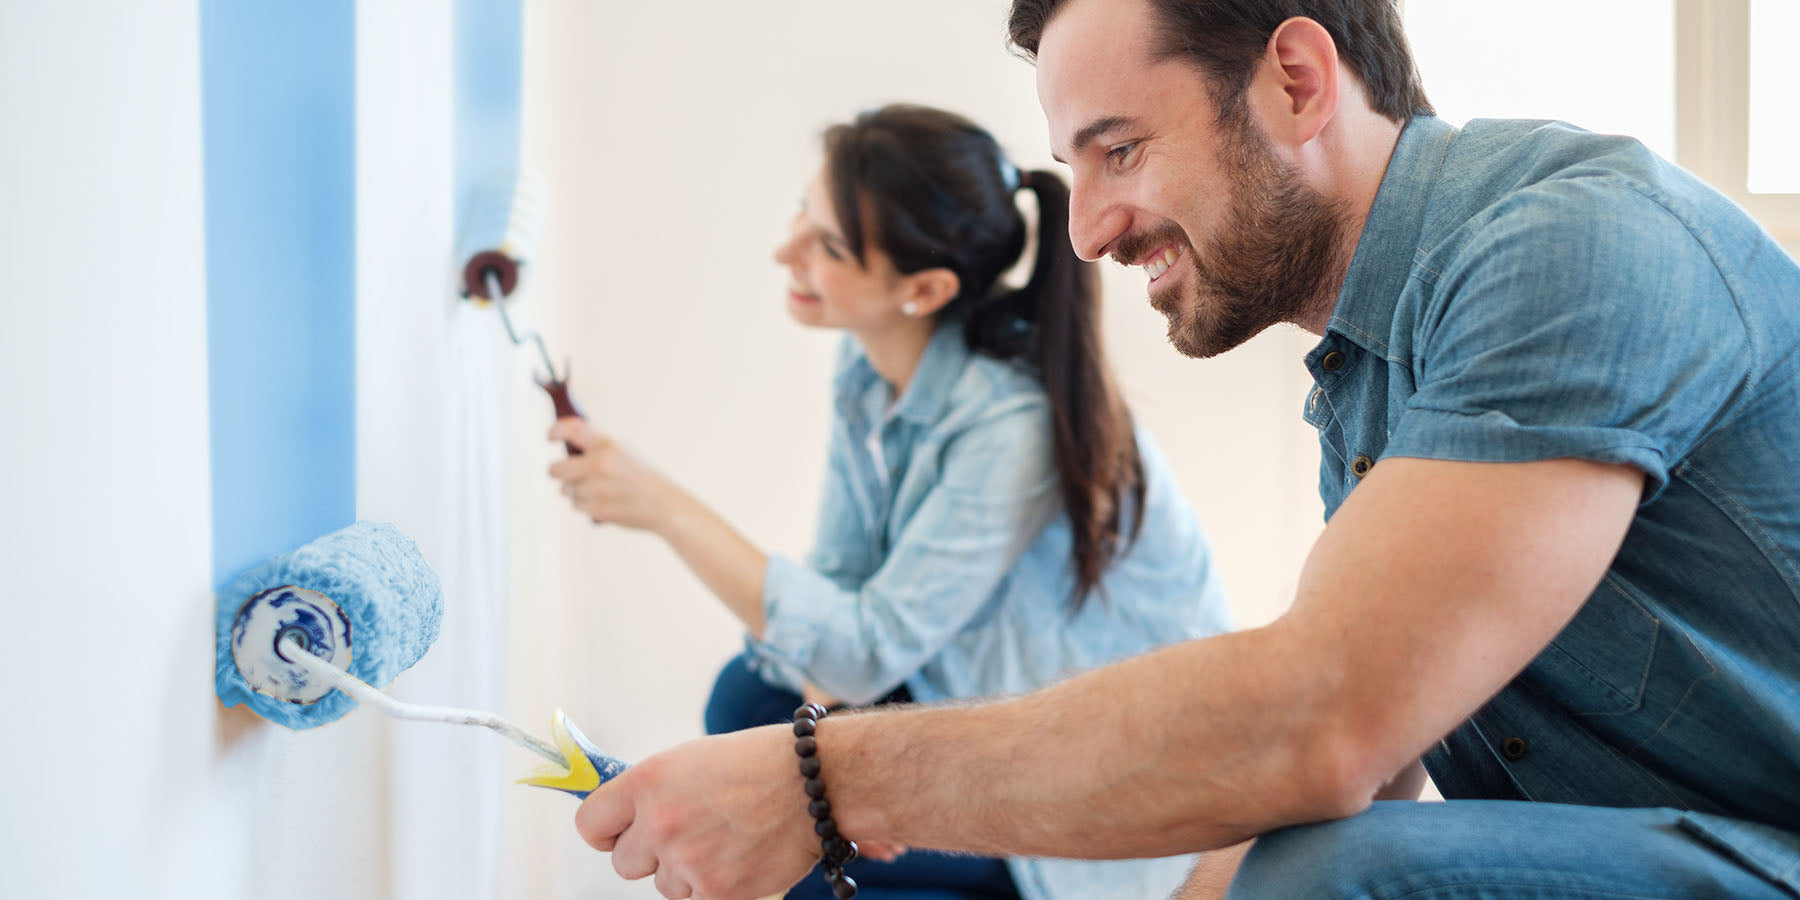 A man and woman using paint rollers to paint a wall light blue.